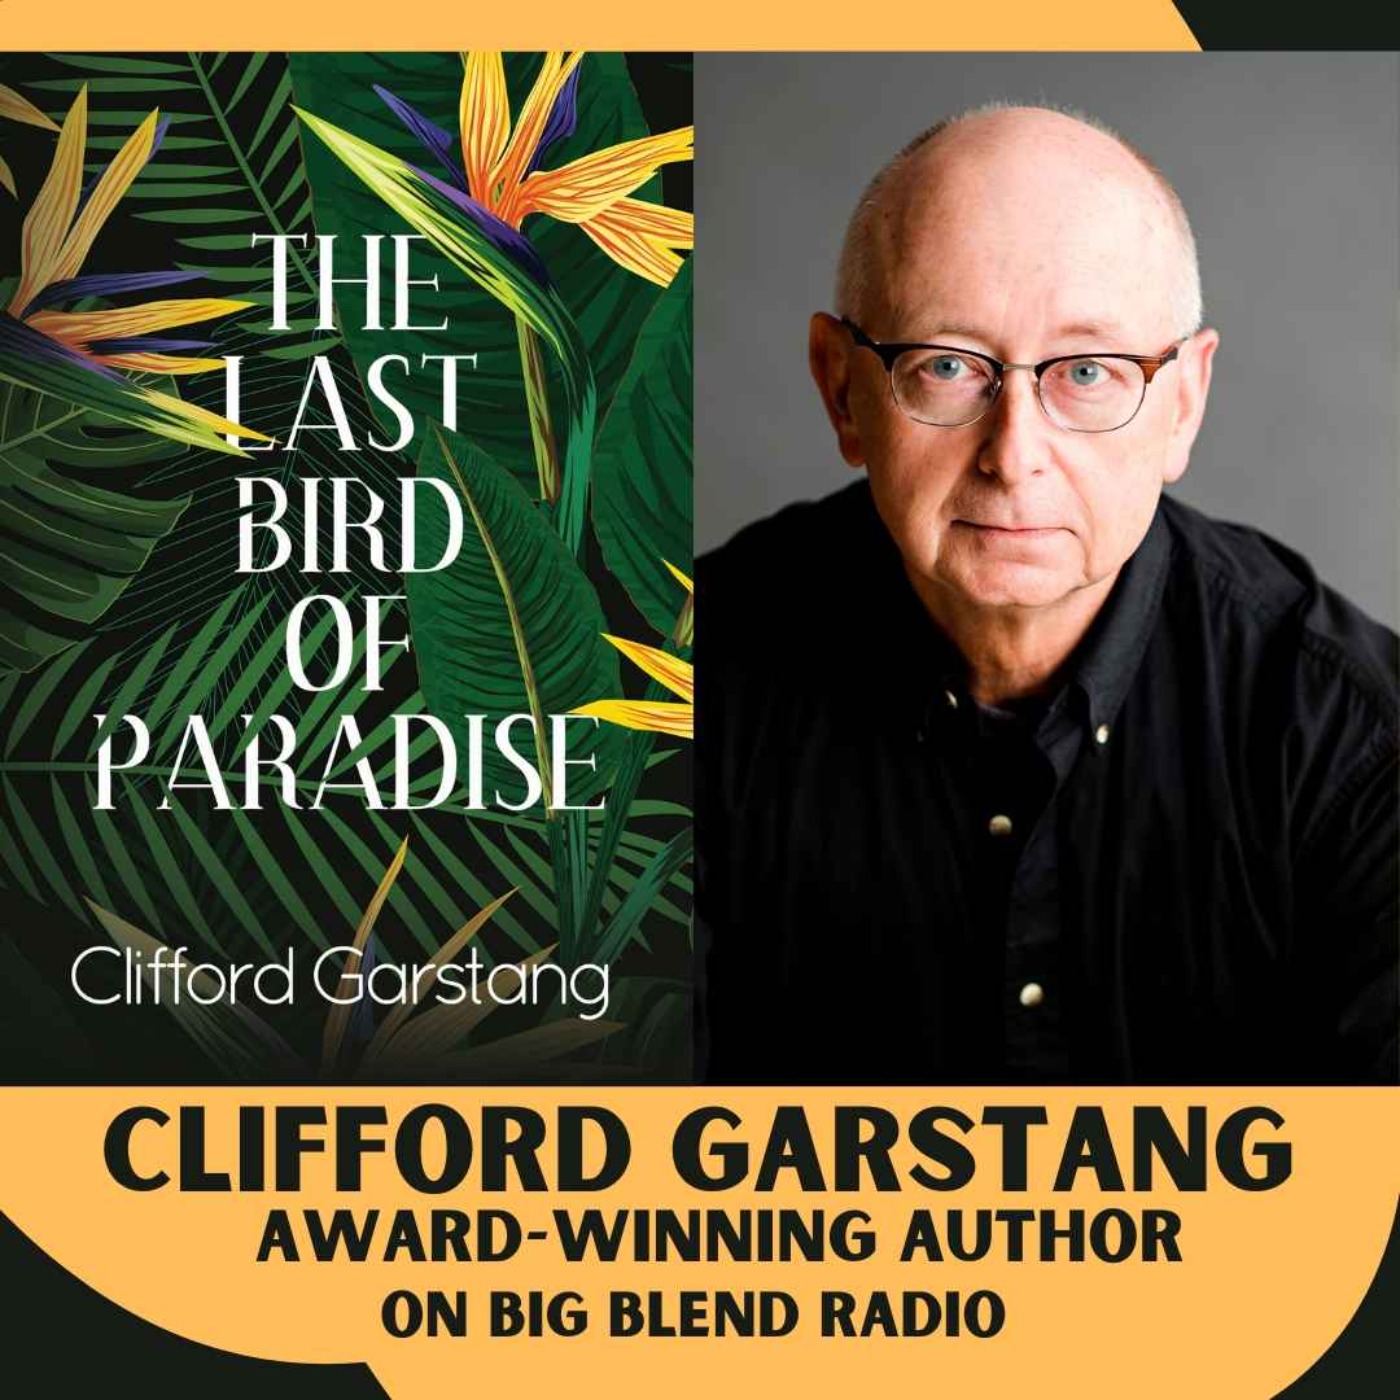 Author Clifford Garstang - The Last Bird of Paradise